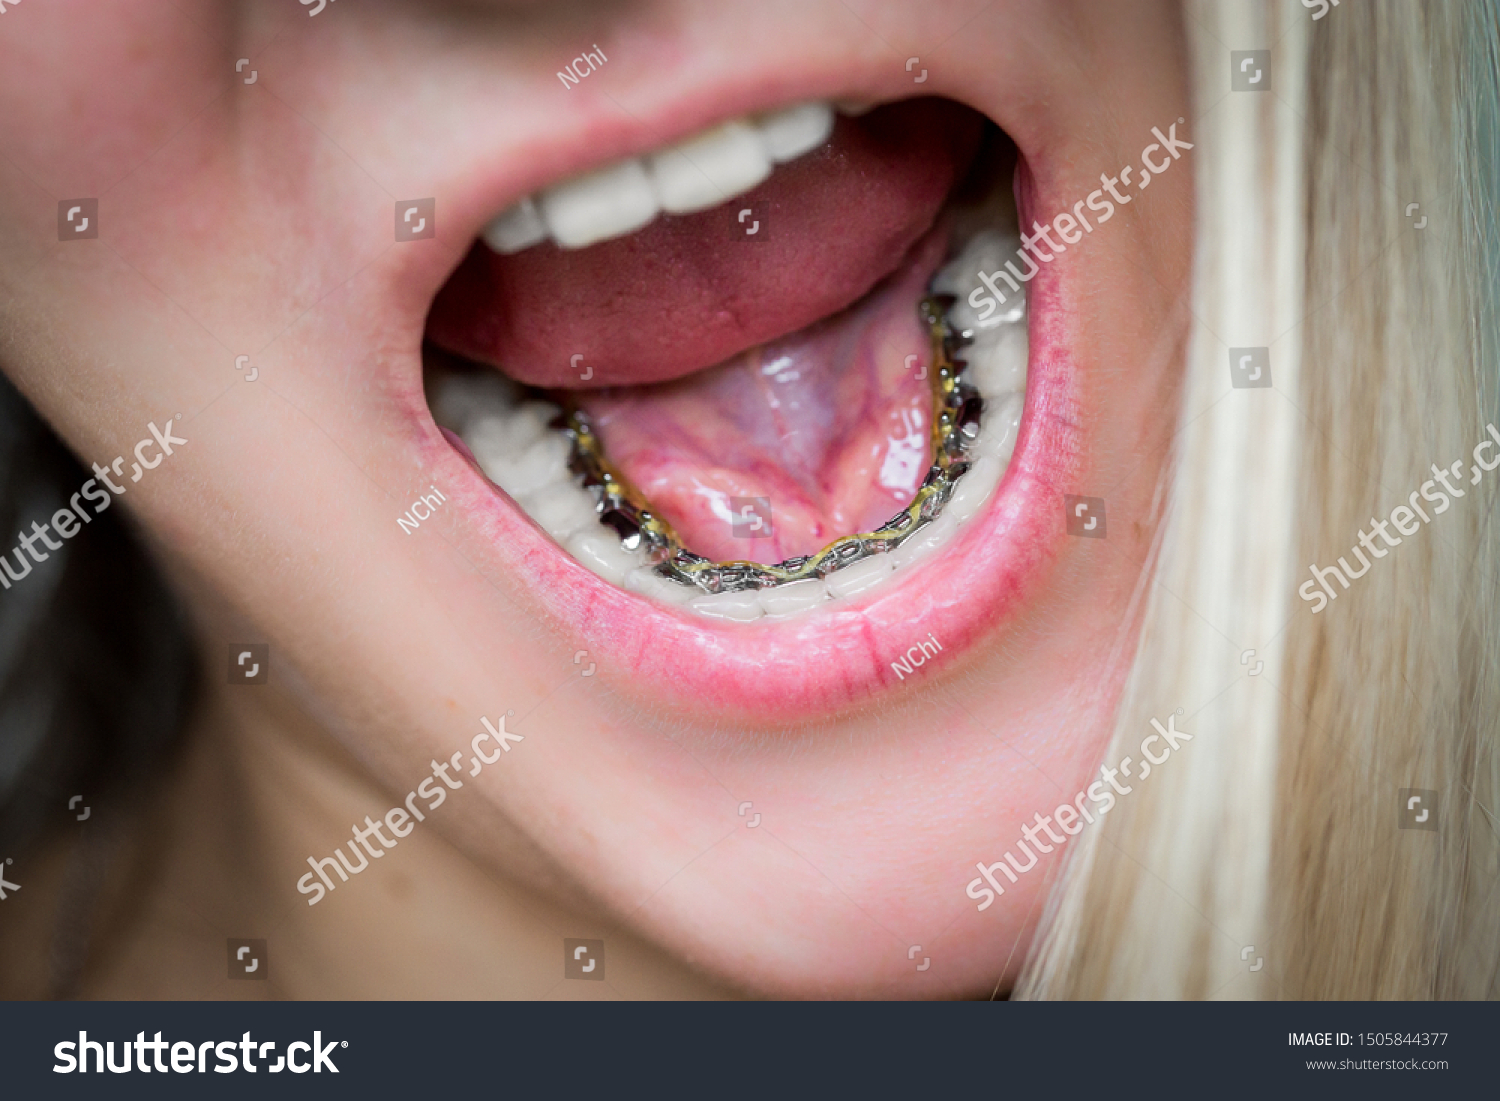 young blonde girl laughs and shows internal lingual invisible braces, mouth close-up, blurred background #1505844377